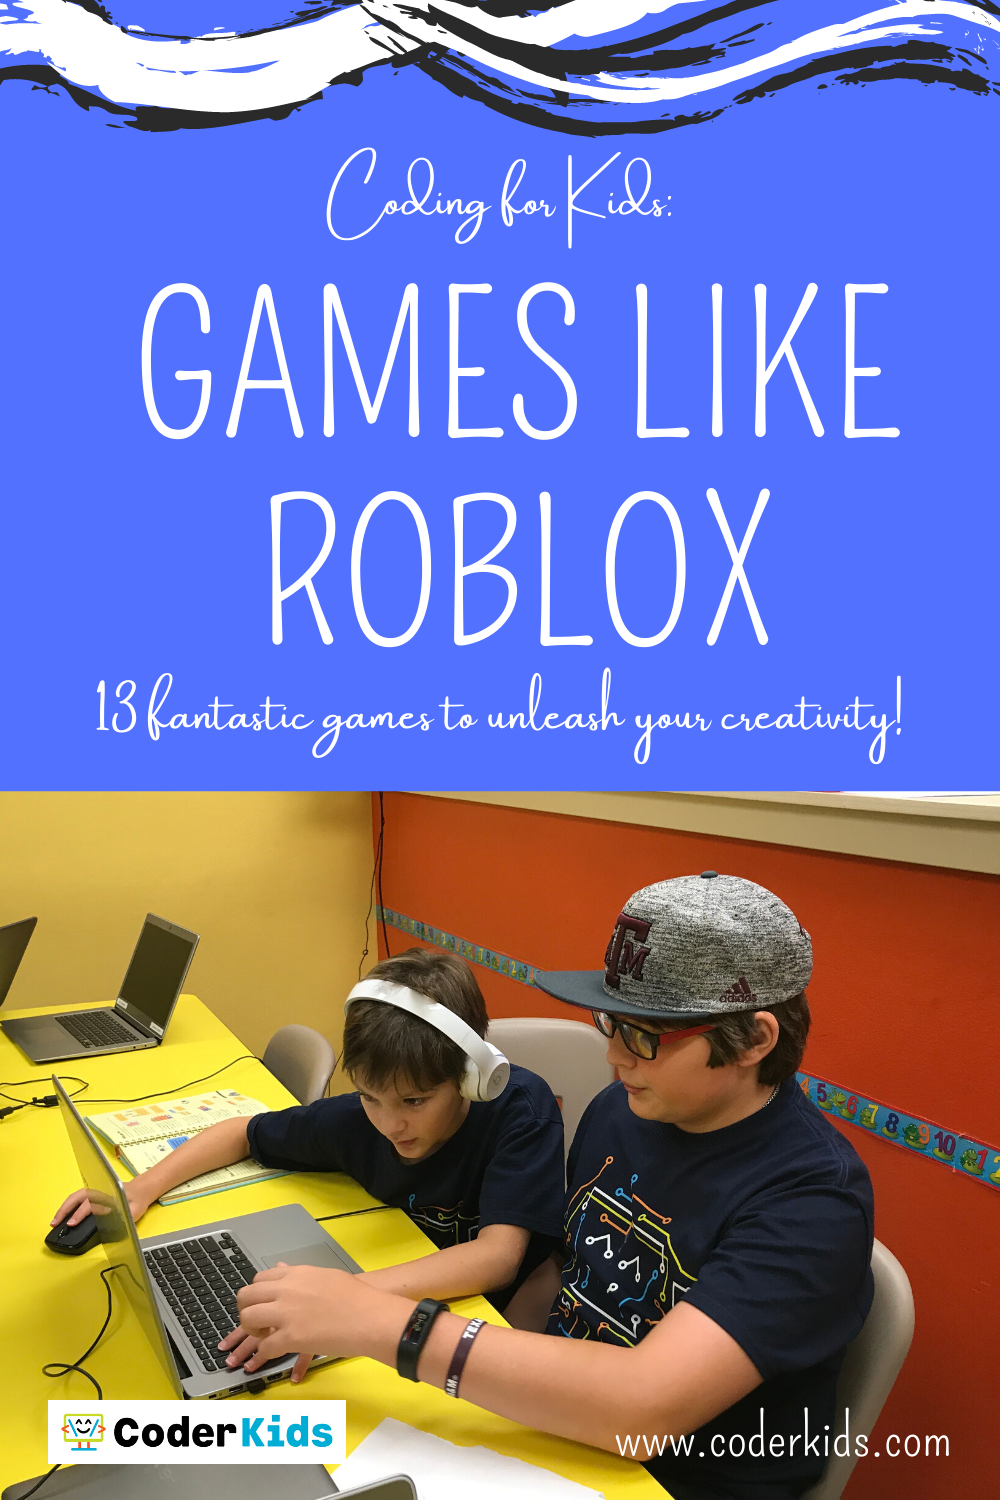 The 5 best realistic games on Roblox